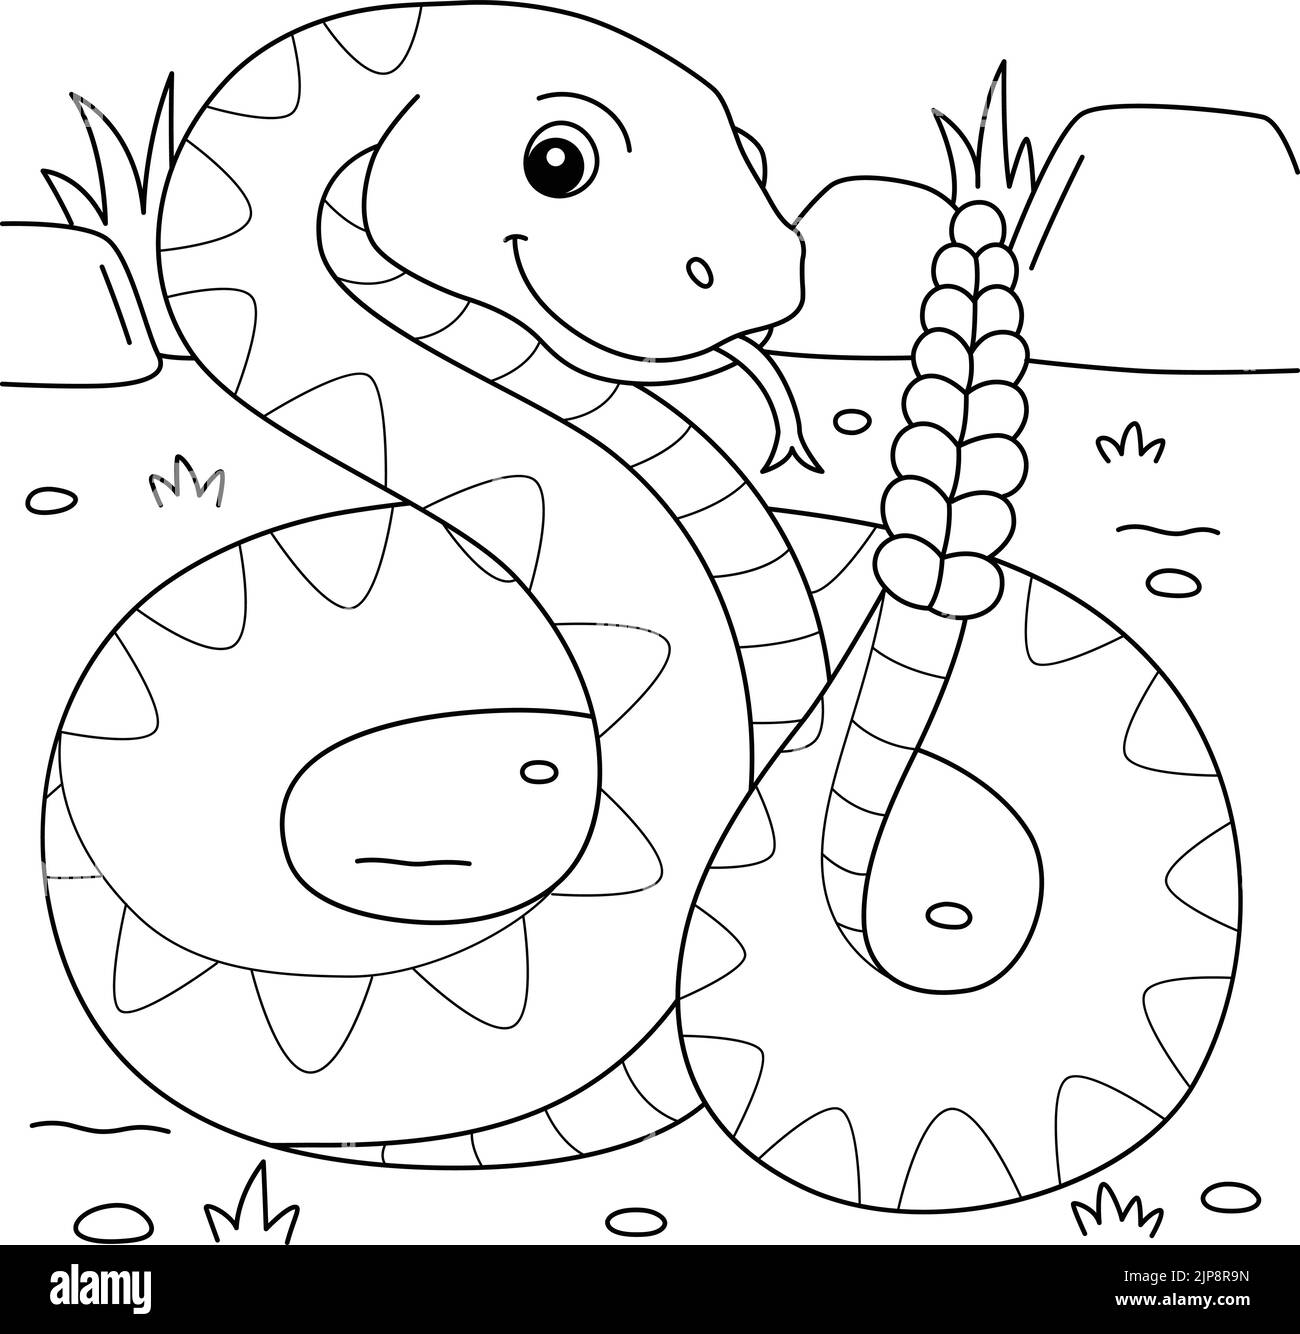 Rattlesnake Animal Coloring Page for Kids Stock Vector